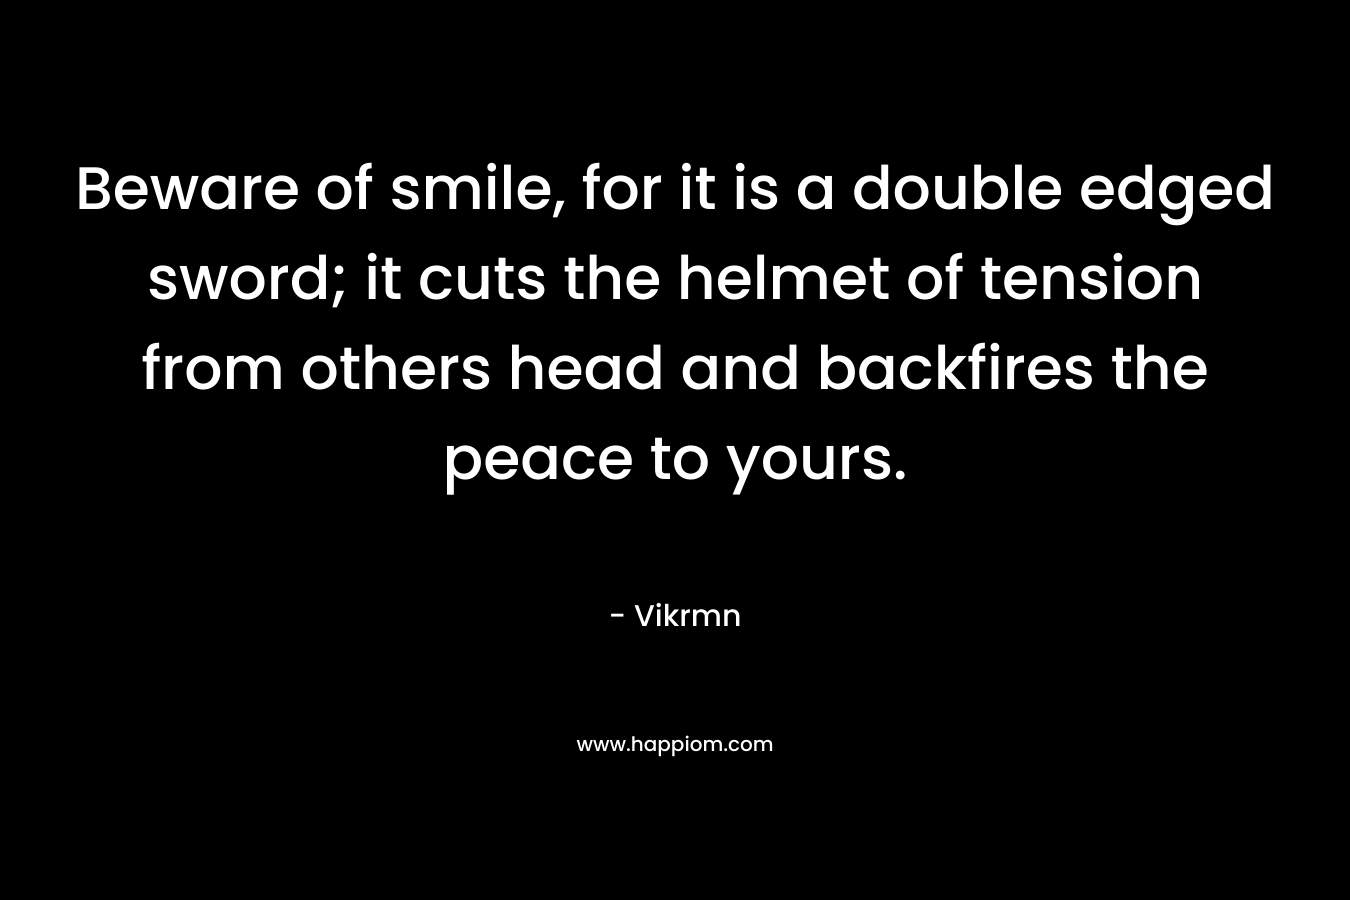 Beware of smile, for it is a double edged sword; it cuts the helmet of tension from others head and backfires the peace to yours.